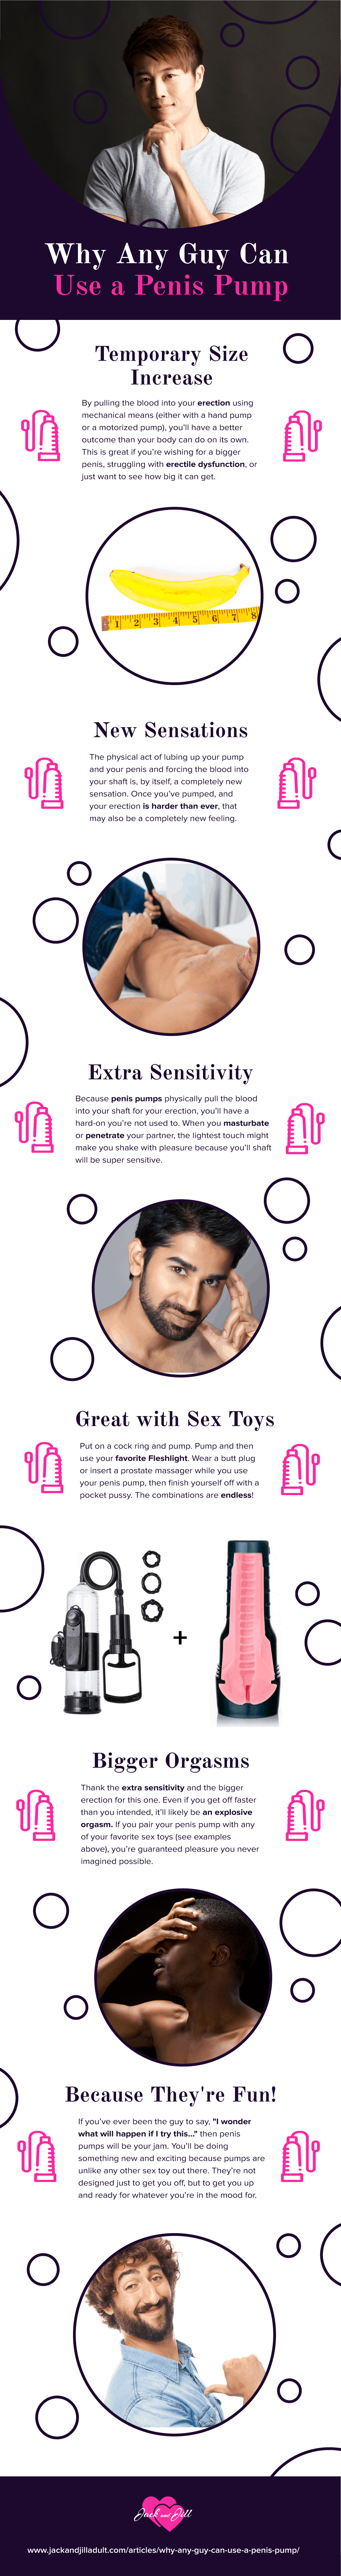 Infographic for Why Any Guy Can Use a Penis Pump